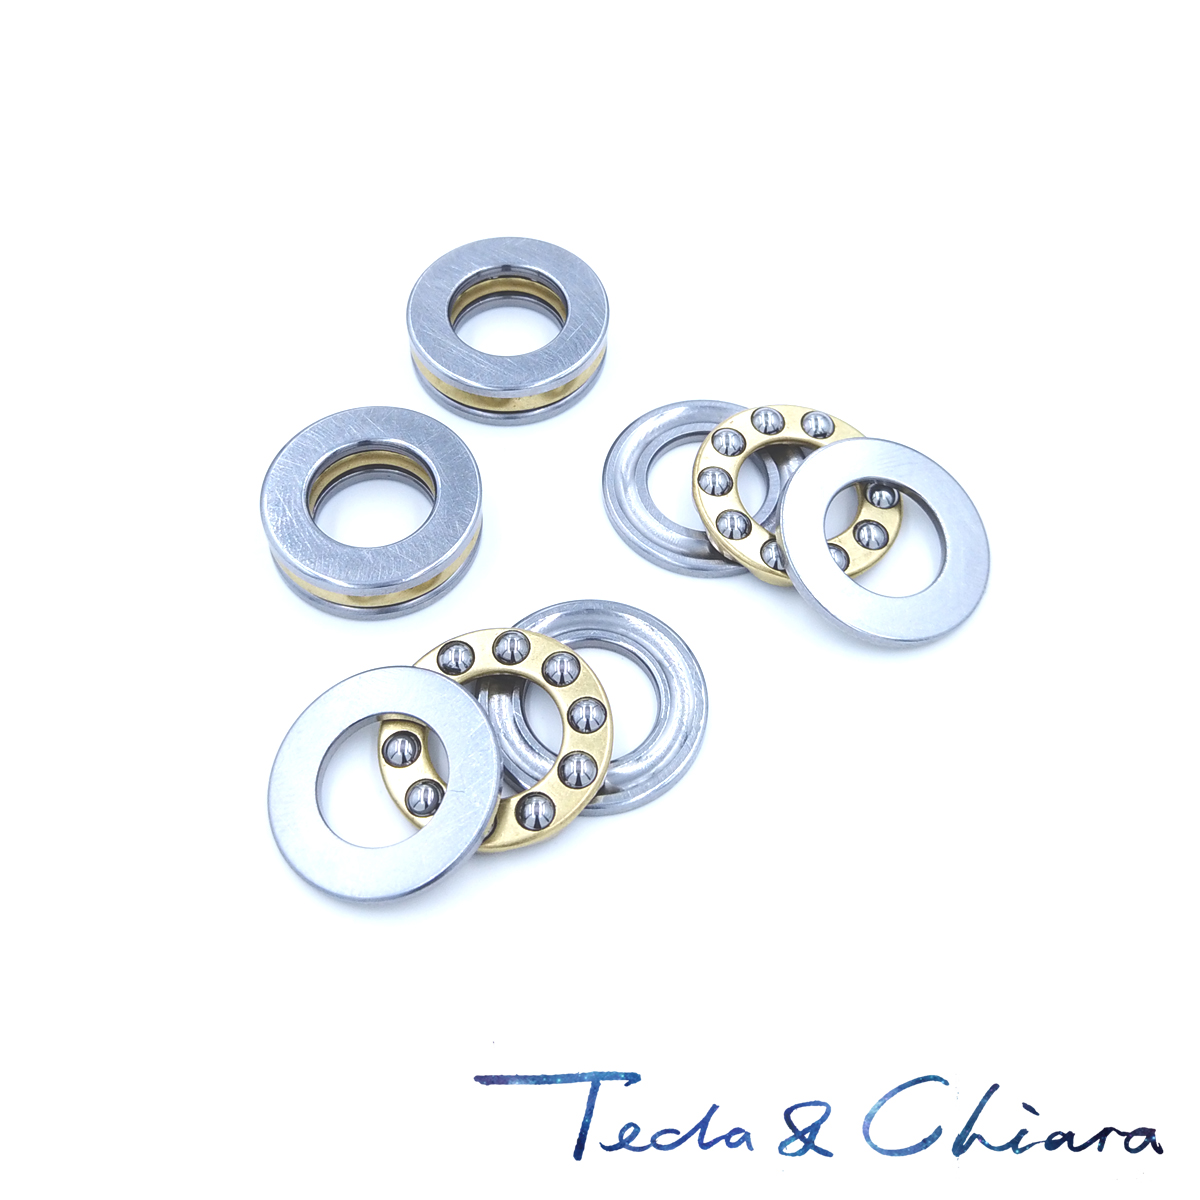 1Pc / 1Piece F8-19M 8 x 19 x 7 mm Axial Ball Thrust Bearing 3-Parts * 3-in-1 Plane High Quality